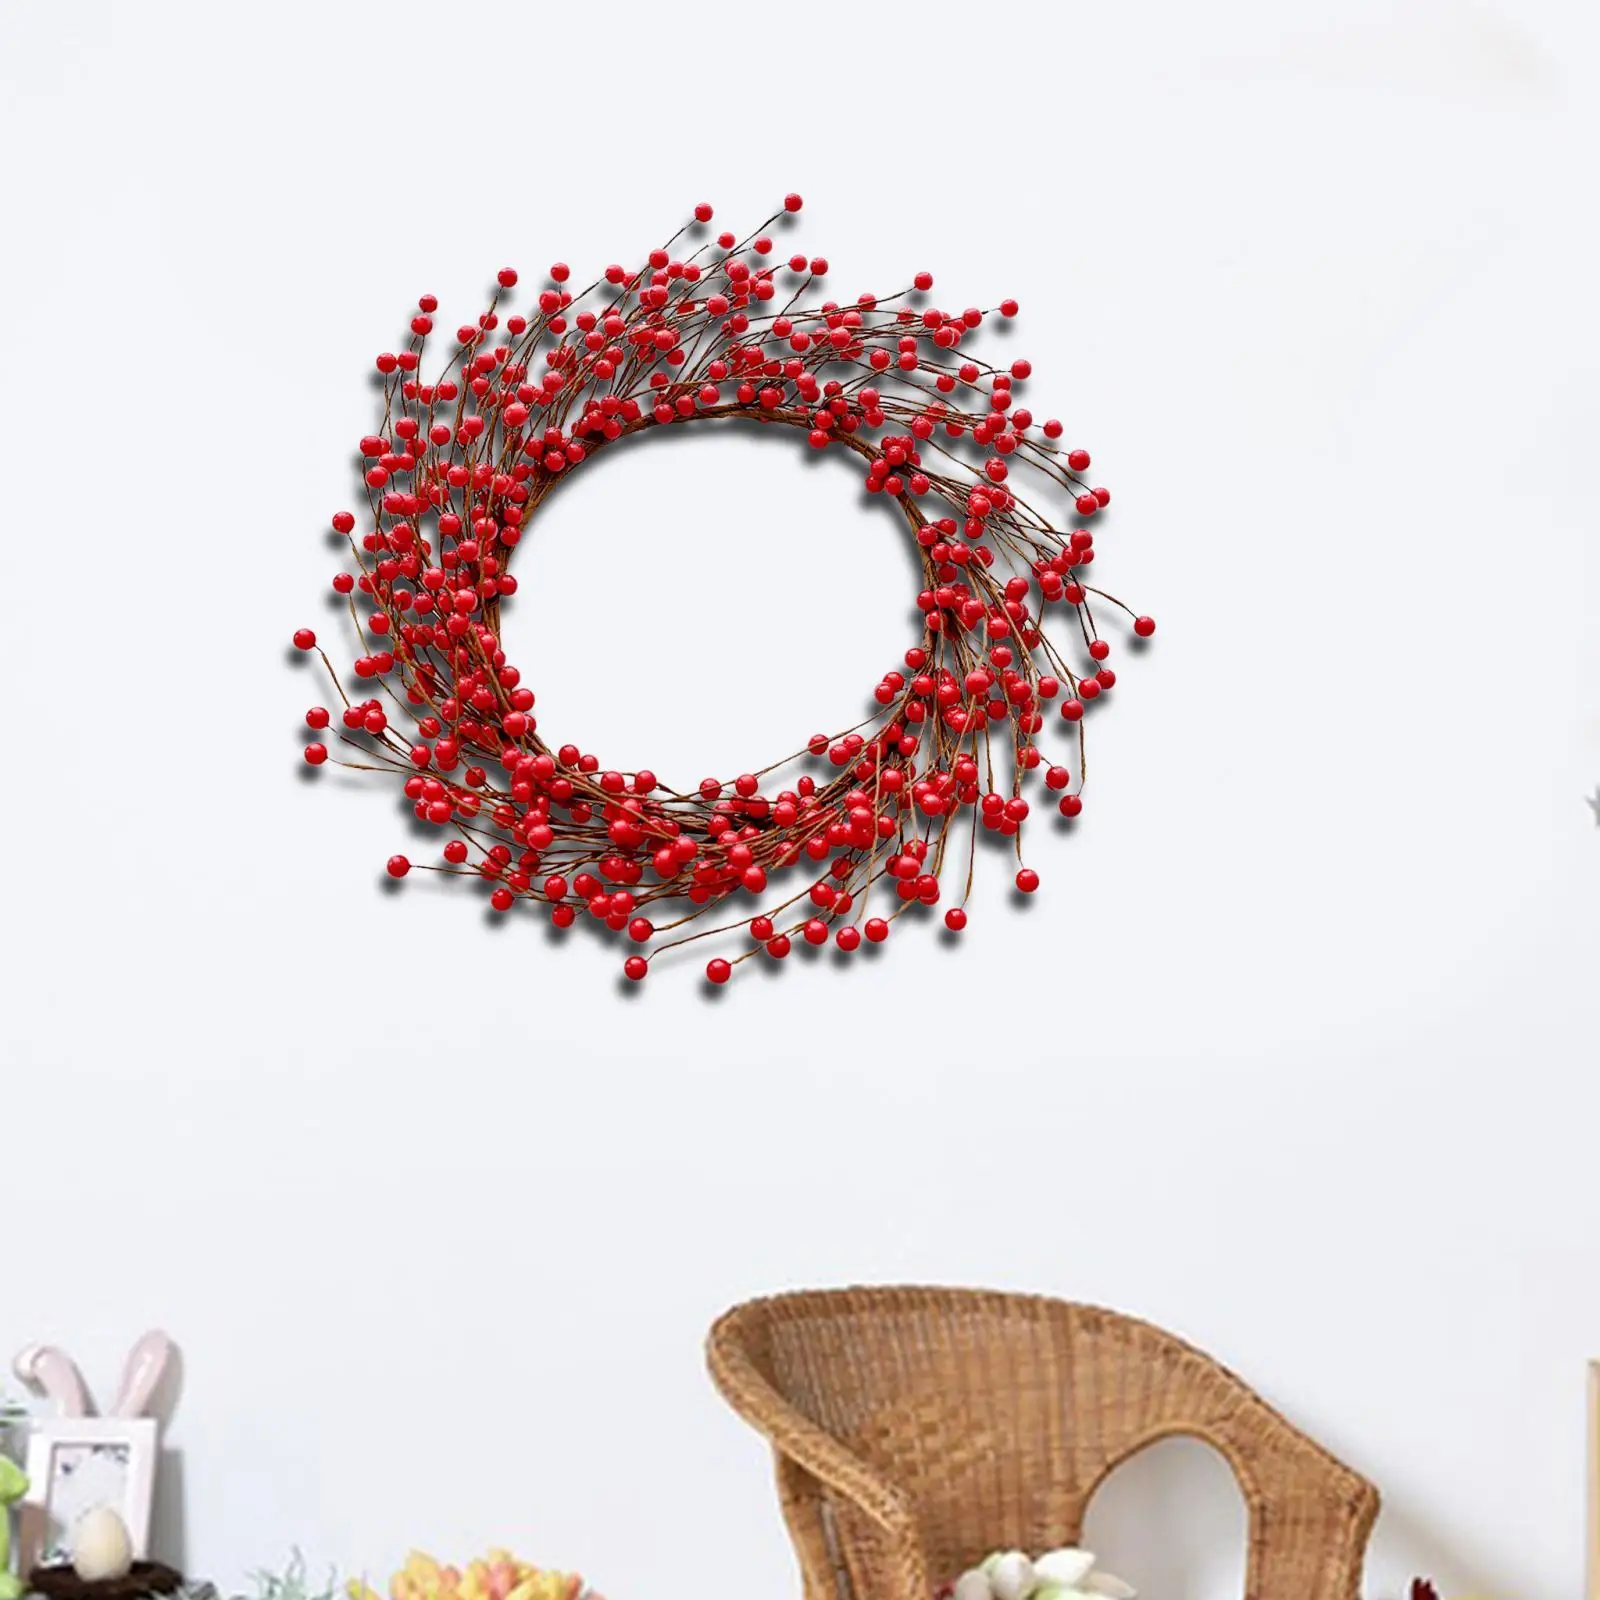 Red Berries Christmas Wreath 18 inch Christmas Decoration Front Door Christmas Wreath for Xmas Wedding Wall Outside Home Decor